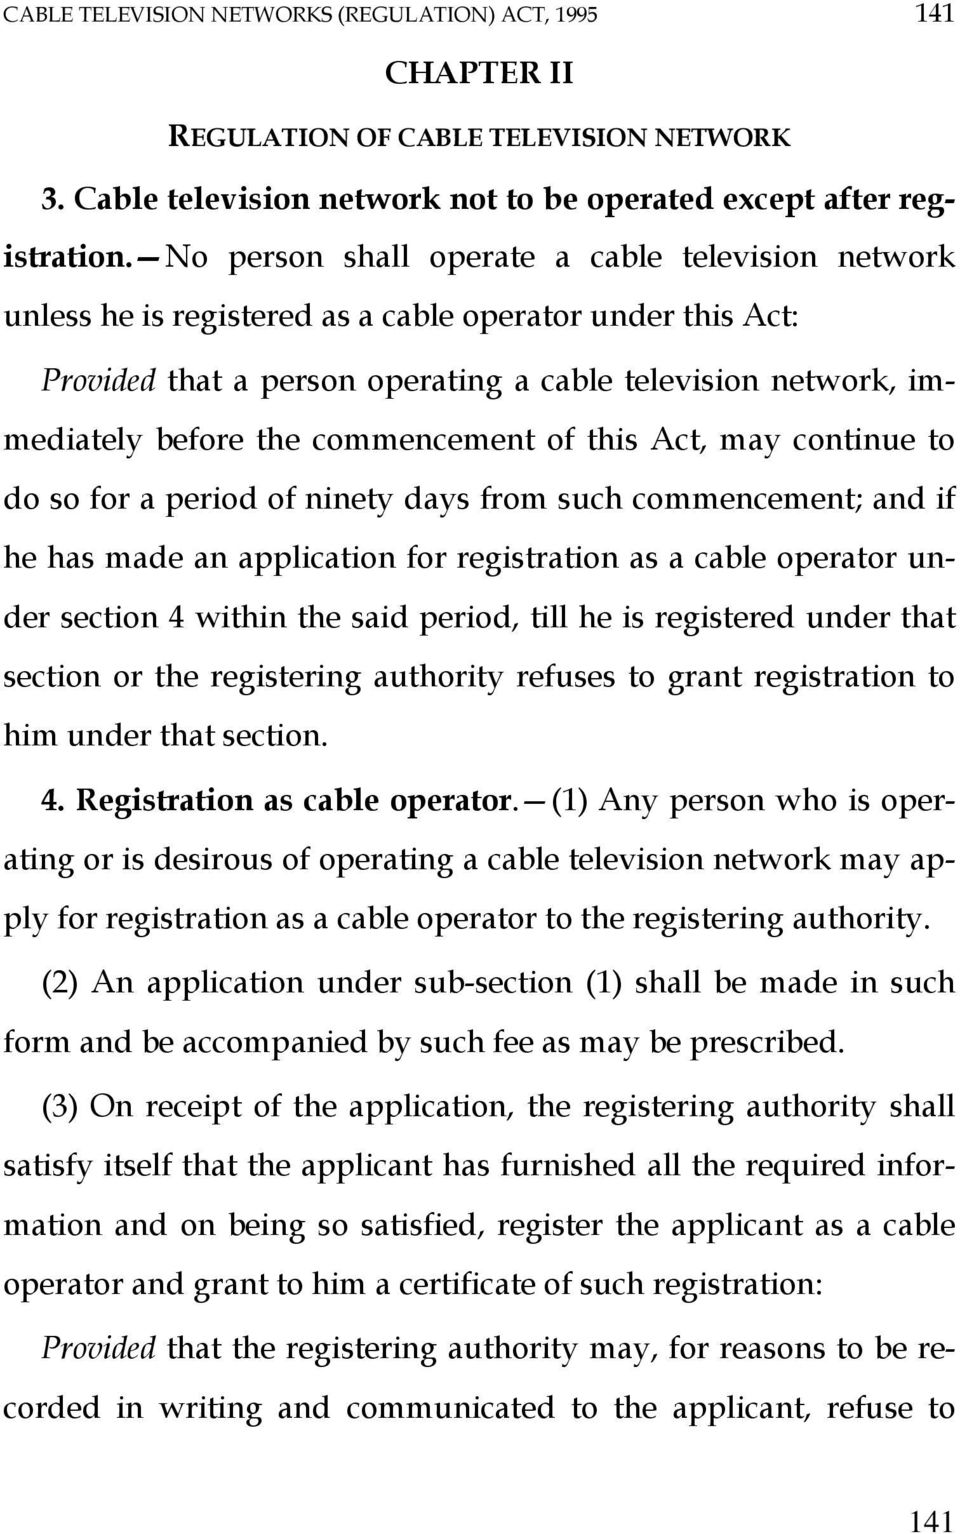 commencement of this Act, may continue to do so for a period of ninety days from such commencement; and if he has made an application for registration as a cable operator under section 4 within the